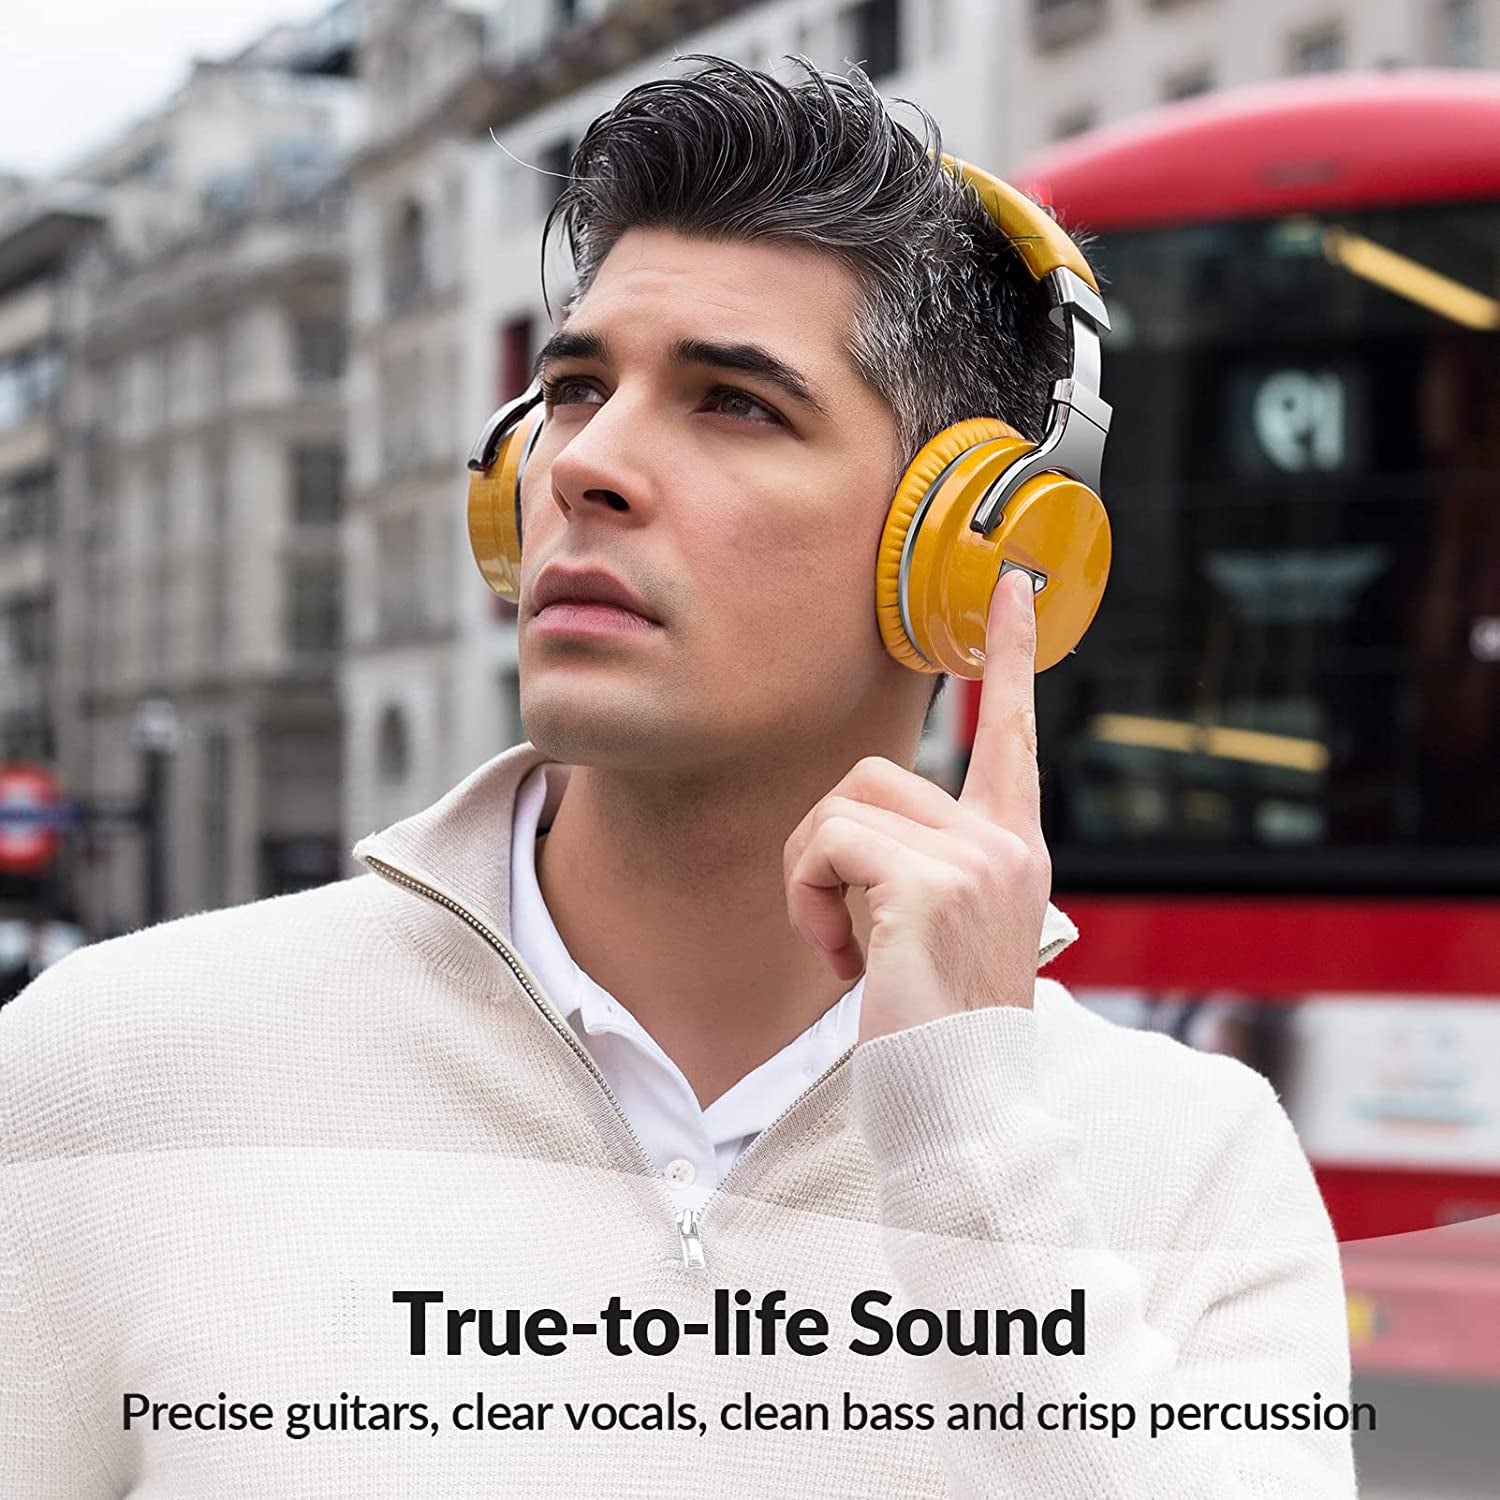 E7 Active Noise Cancelling Headphones Bluetooth Headphones with Microphone Deep Bass Wireless Headphones over Ear, Comfortable Protein Earpads, 30 Hours Playtime for Travel/Work, Yellow